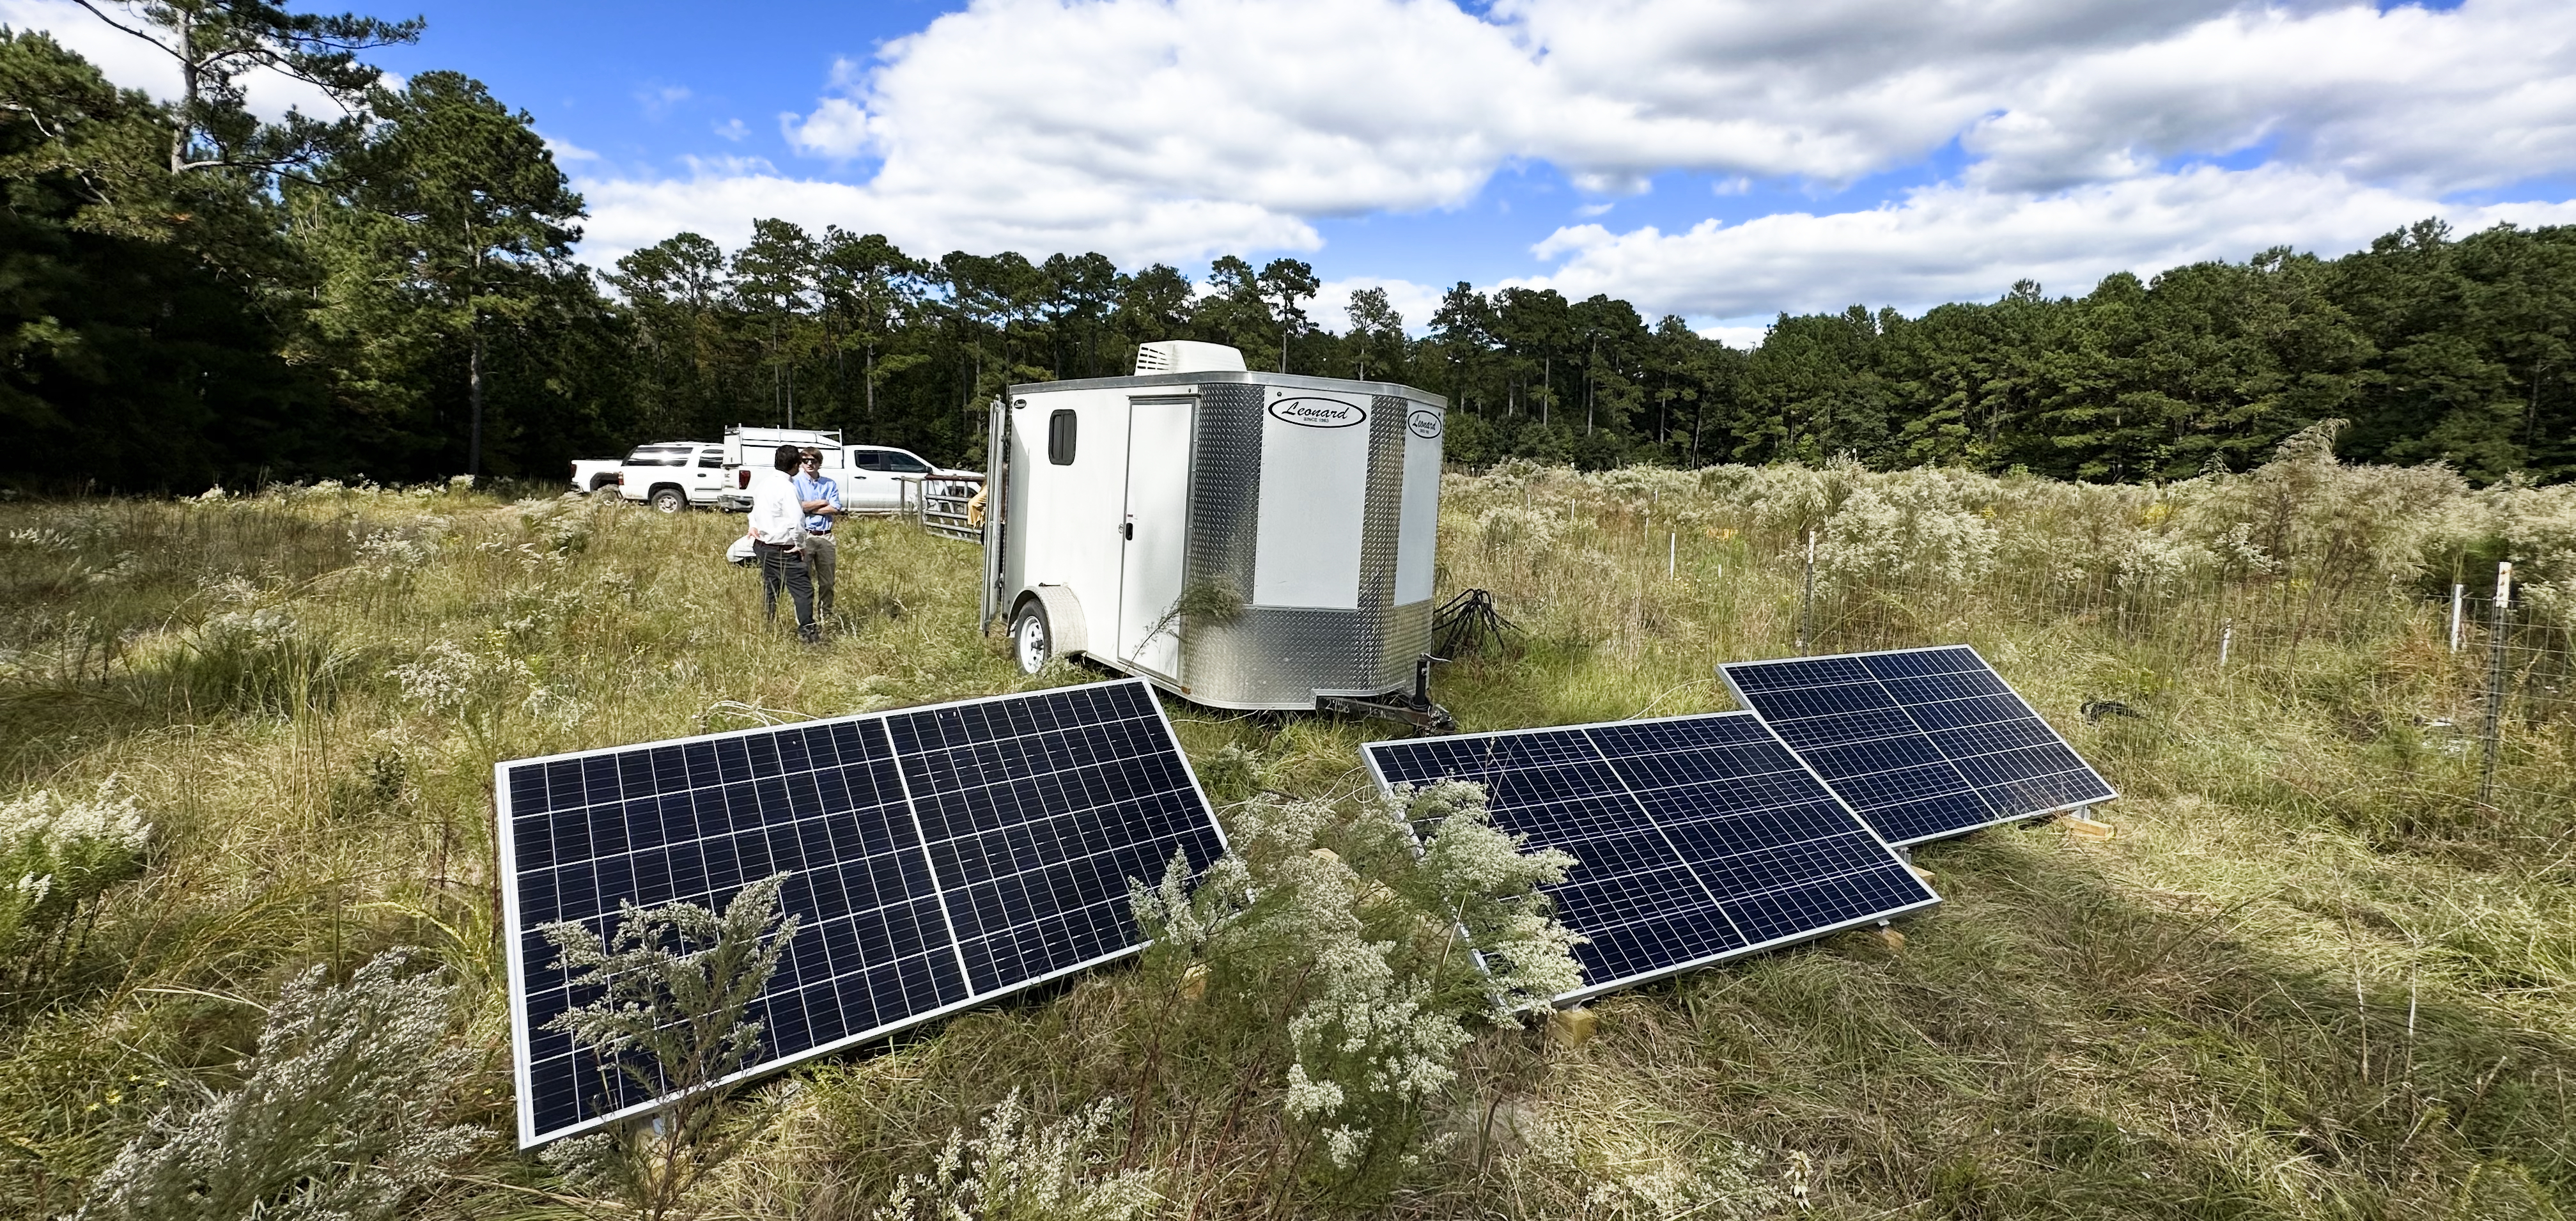 image of a field with a trailer and solar panels